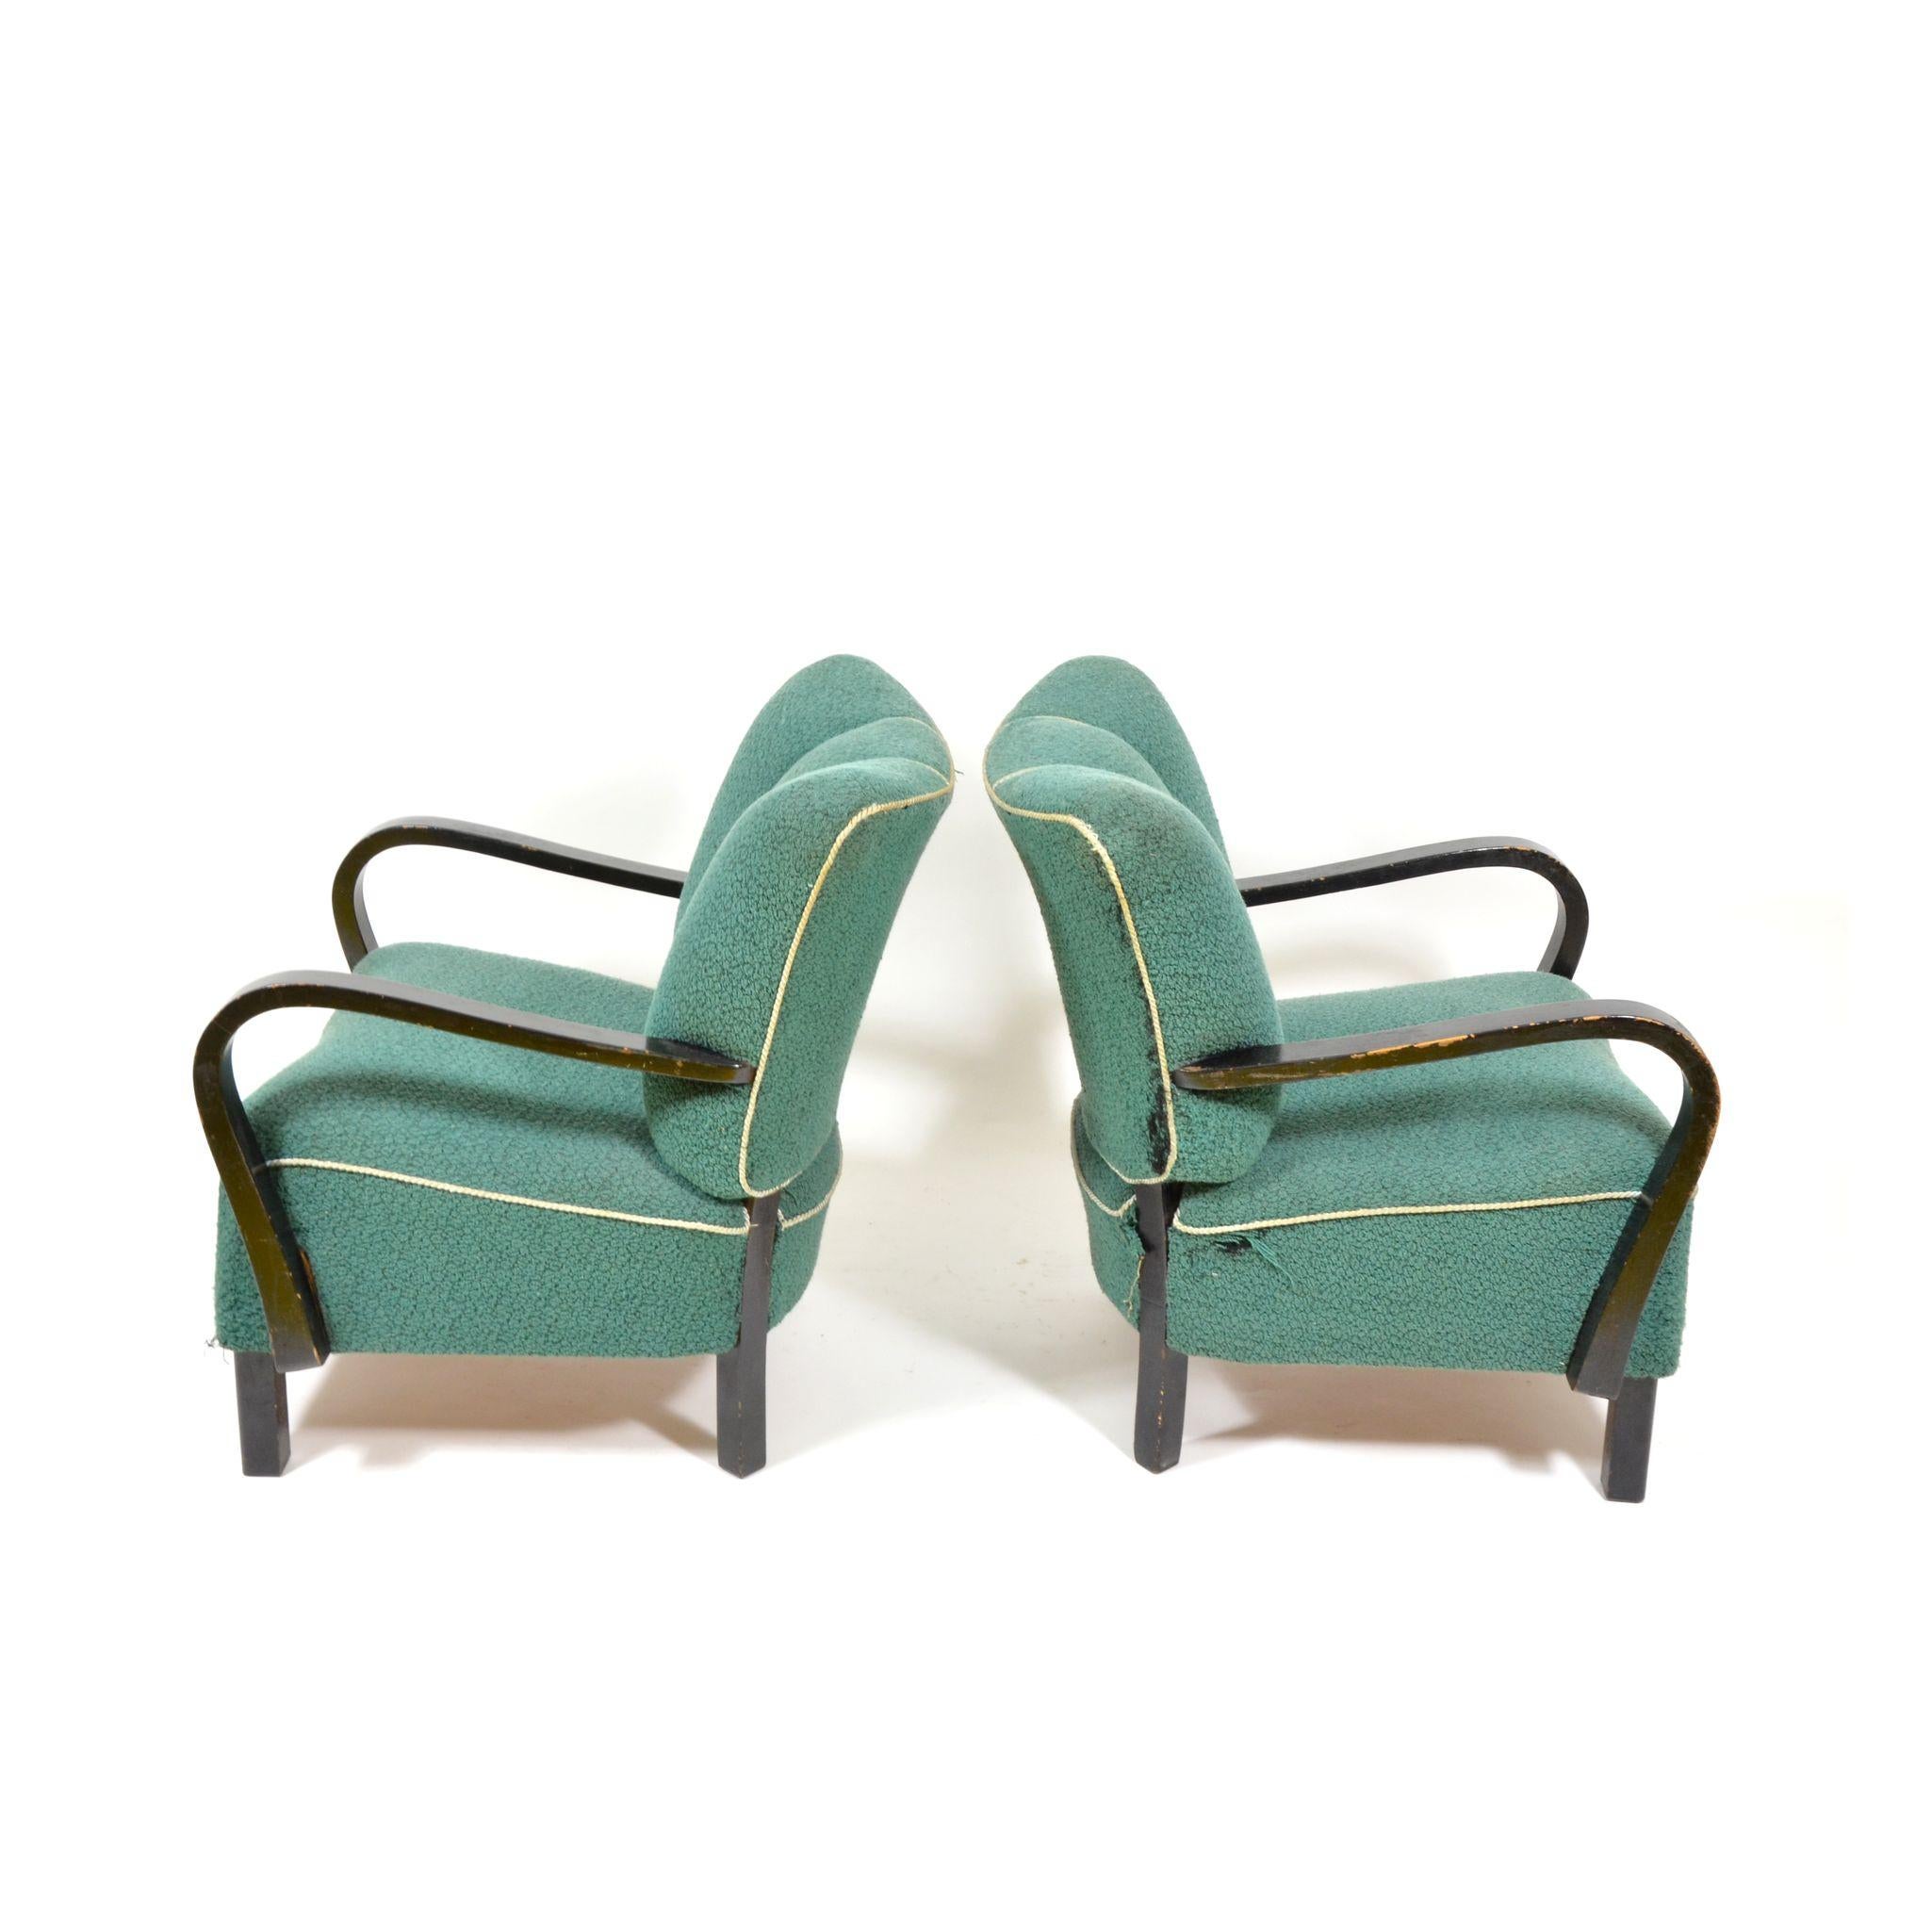 Art Deco Pair of Original Armchairs with Wooden Armrests, Czechoslovakia, 1940s For Sale